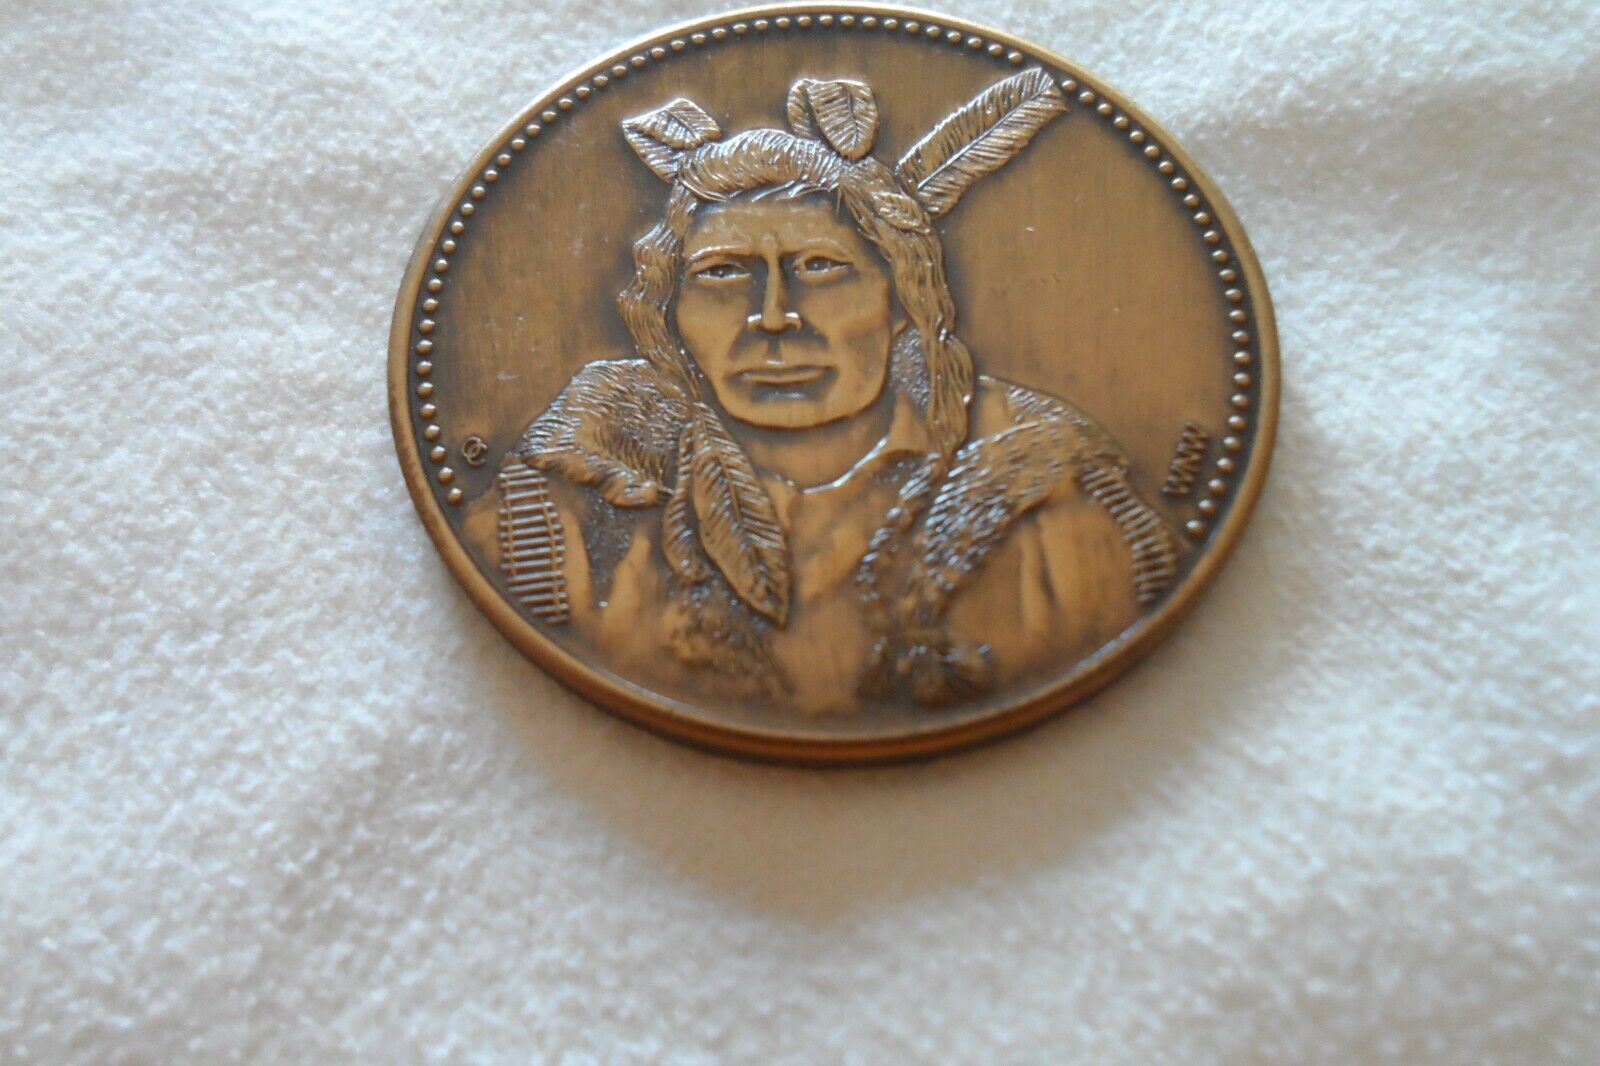 VERY UNIQUE AND GORGEOUS 3 COIN NATIVE AMERICAN SET OSAGE AND SIOUX Без бренда - фотография #4